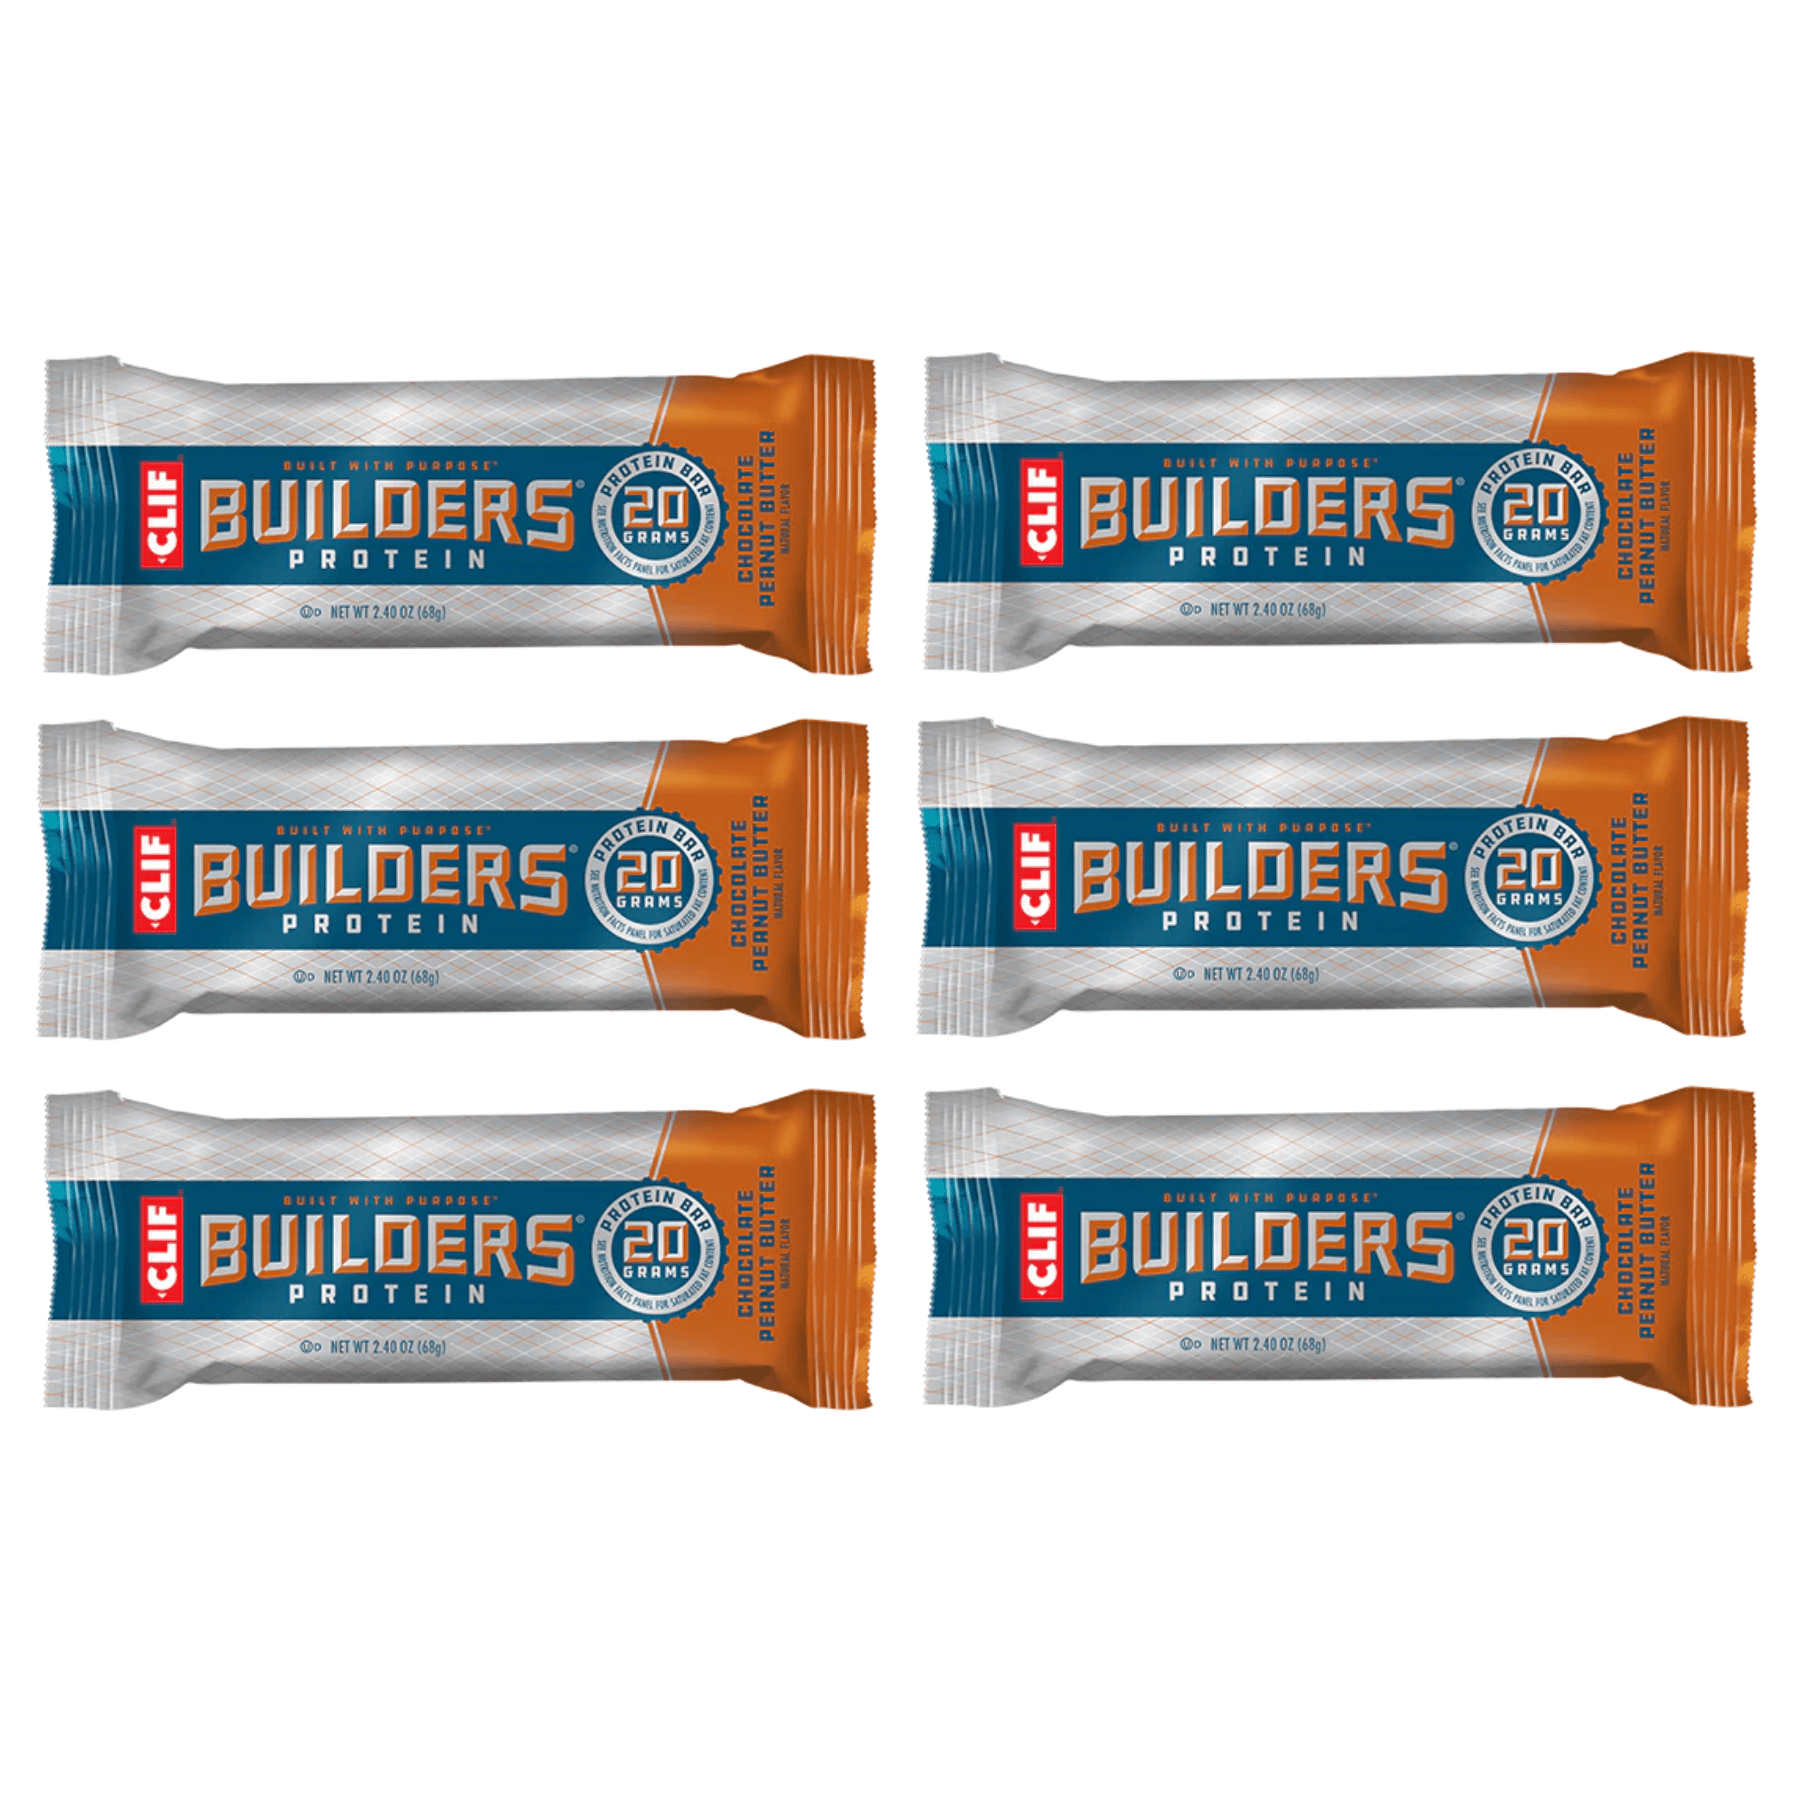 clif Energy Bar 6 / Chocolate Peanut Butter Builders Protein Bar CLIF336